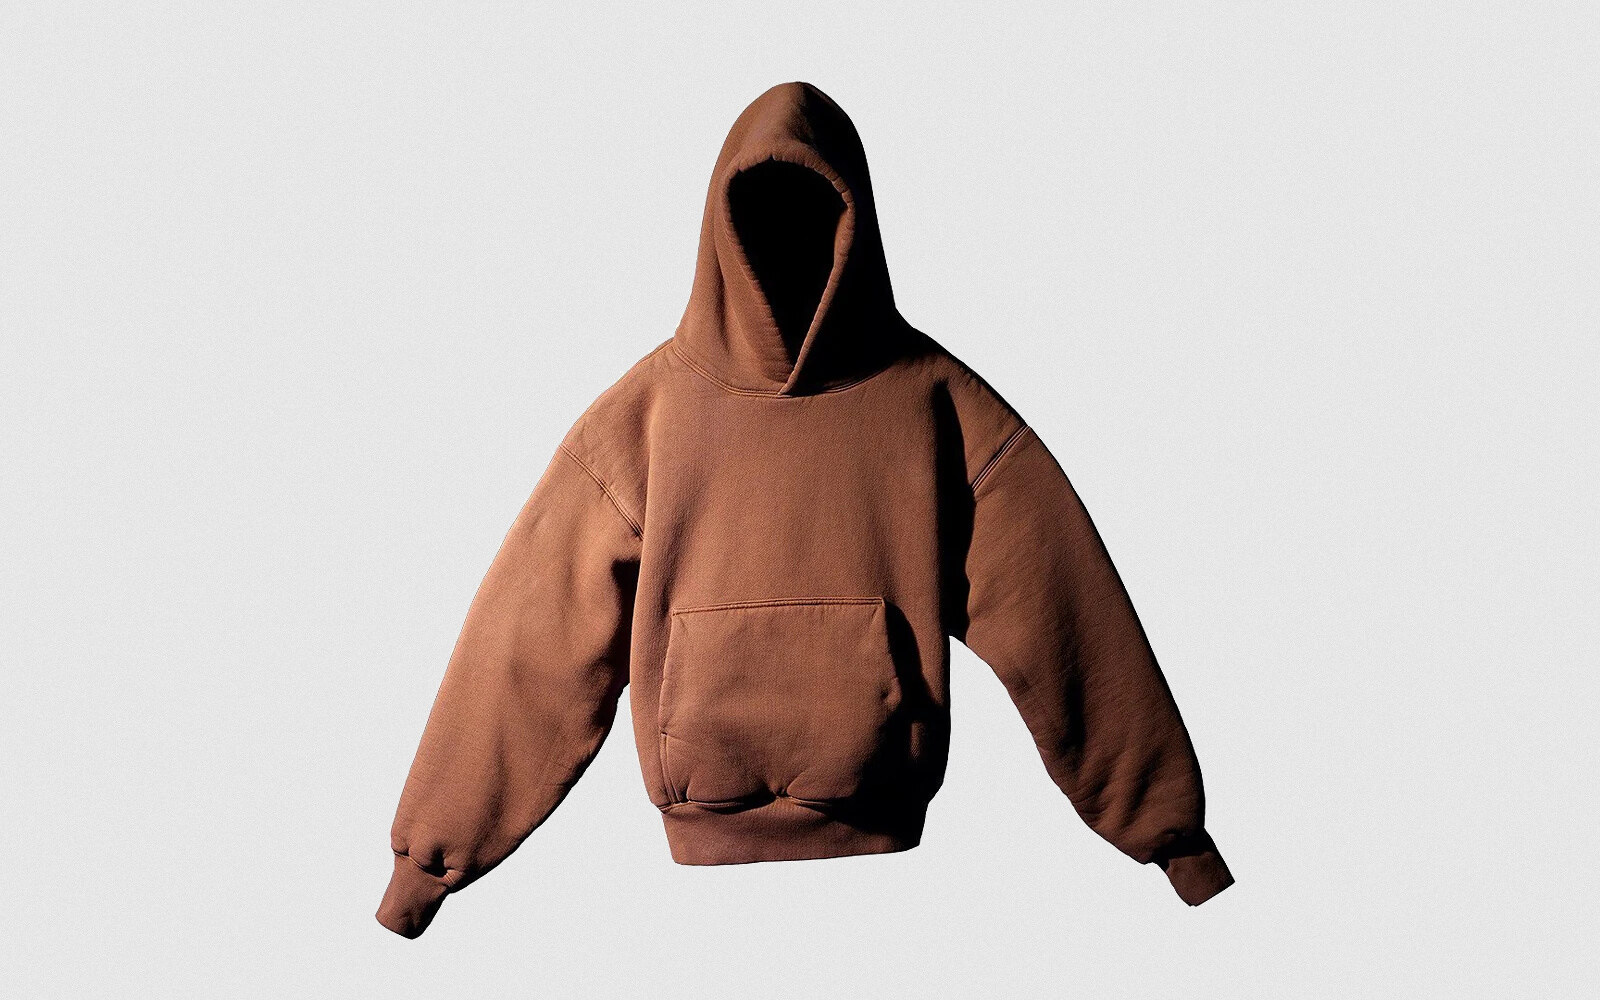 YEEZY Gap Perfect Hoodie Resell Price